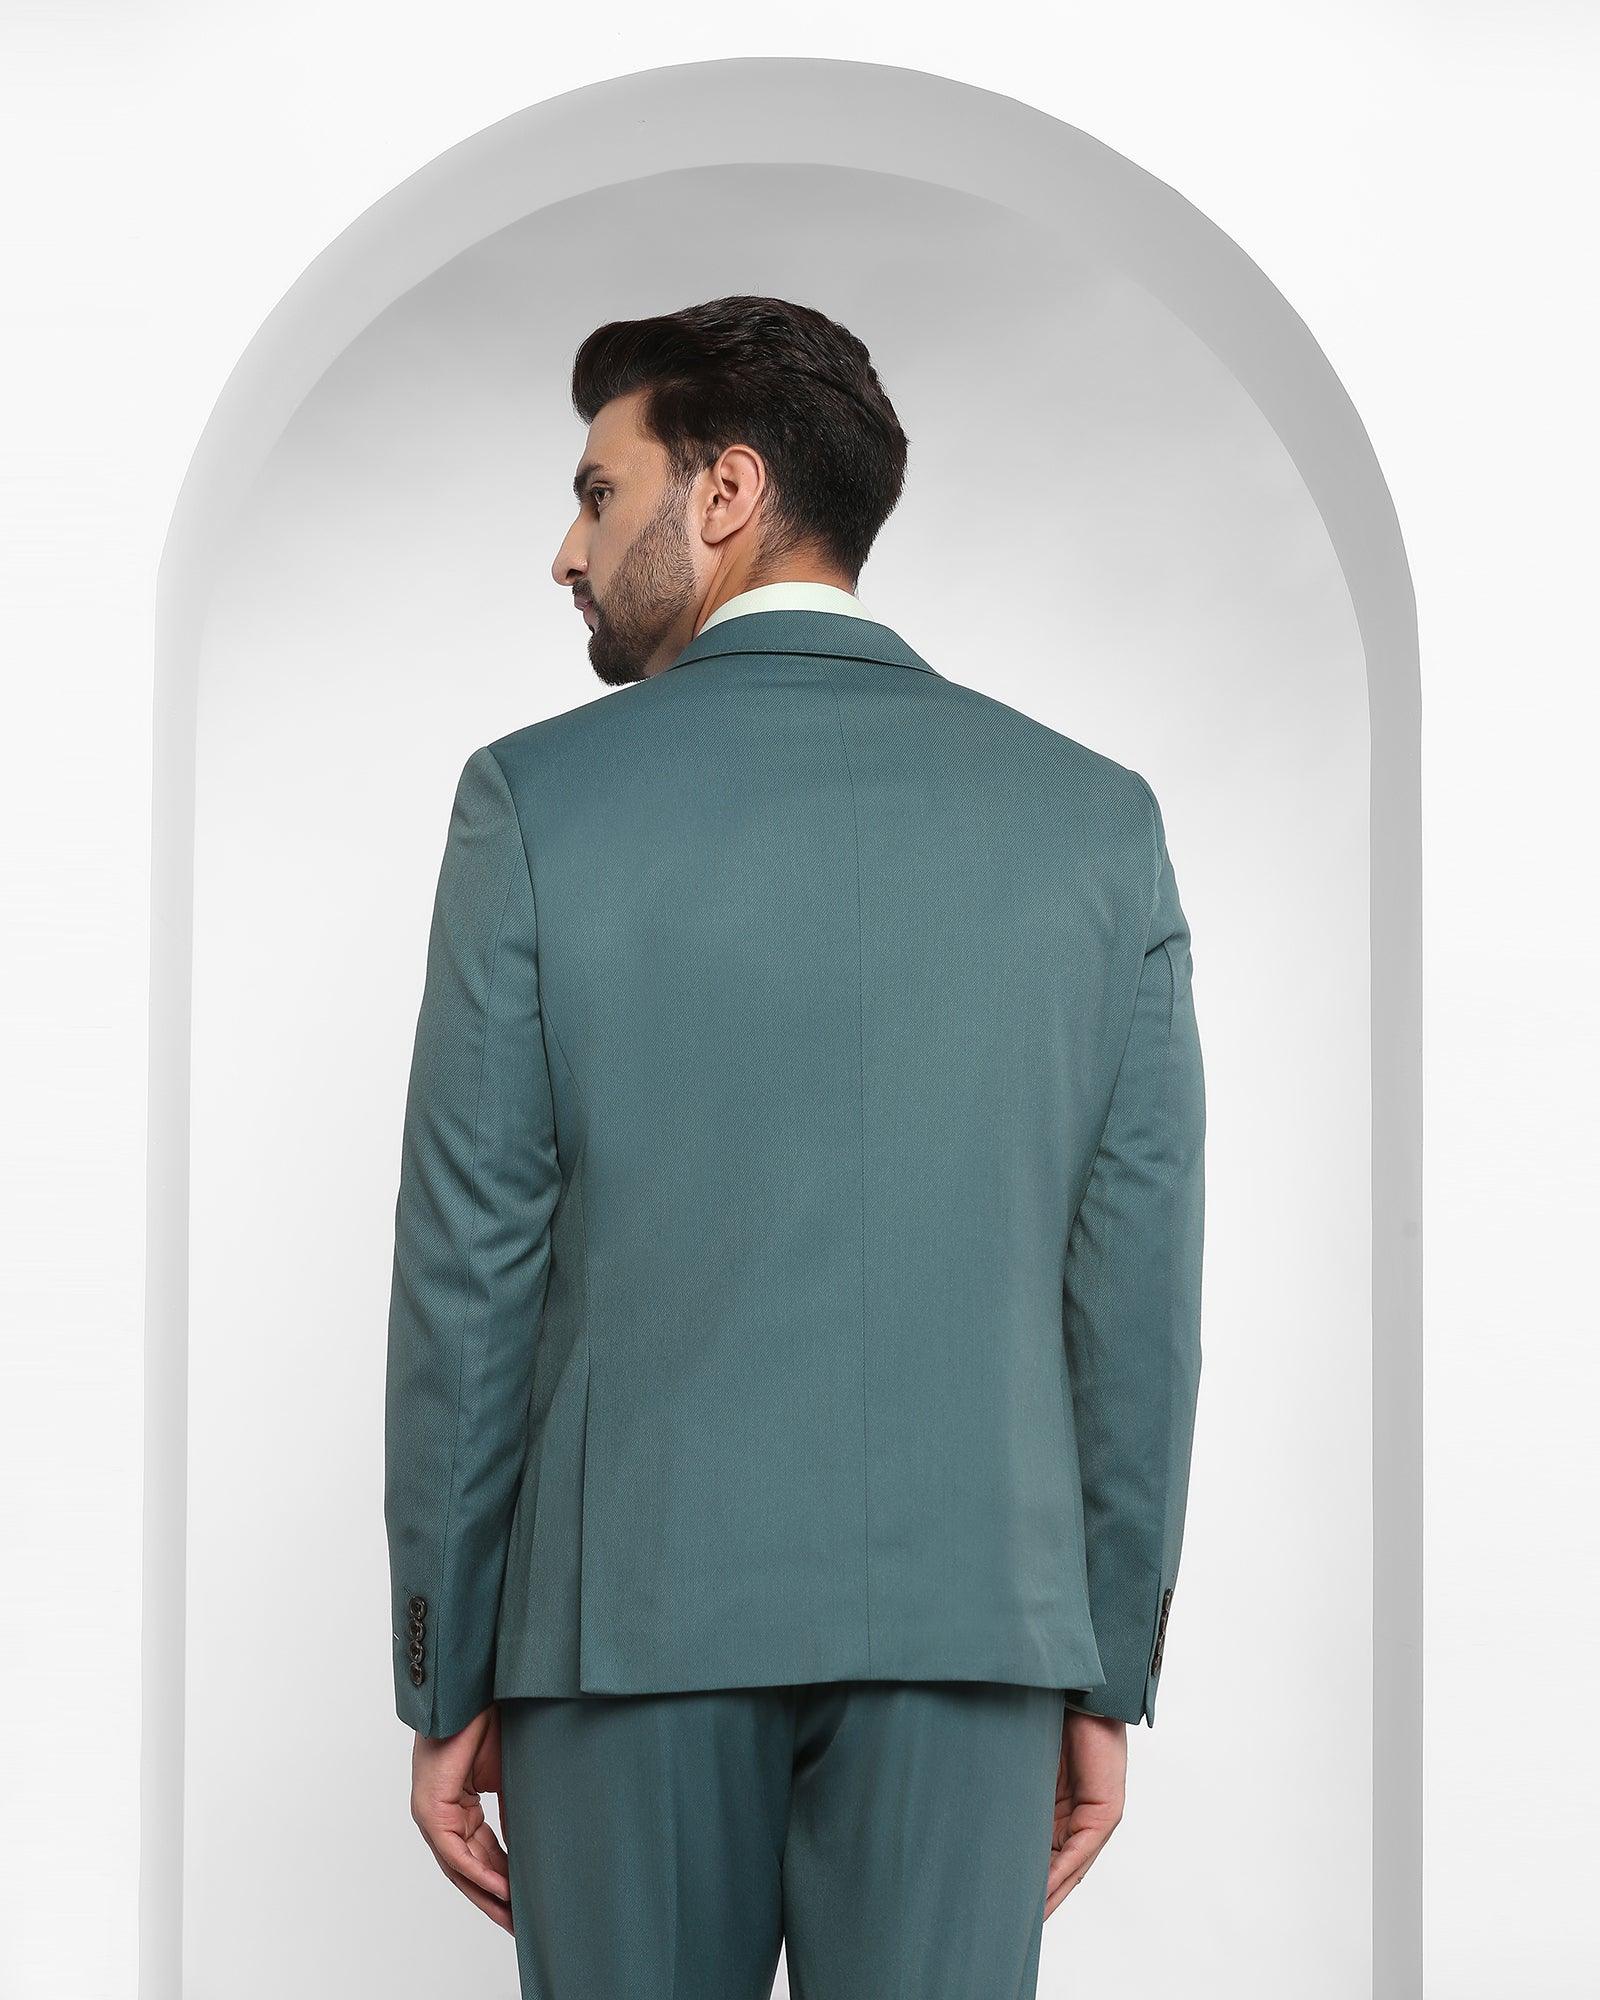 Buy blackberrys Mens Solid Bottle Green Suits Set at Amazon.in